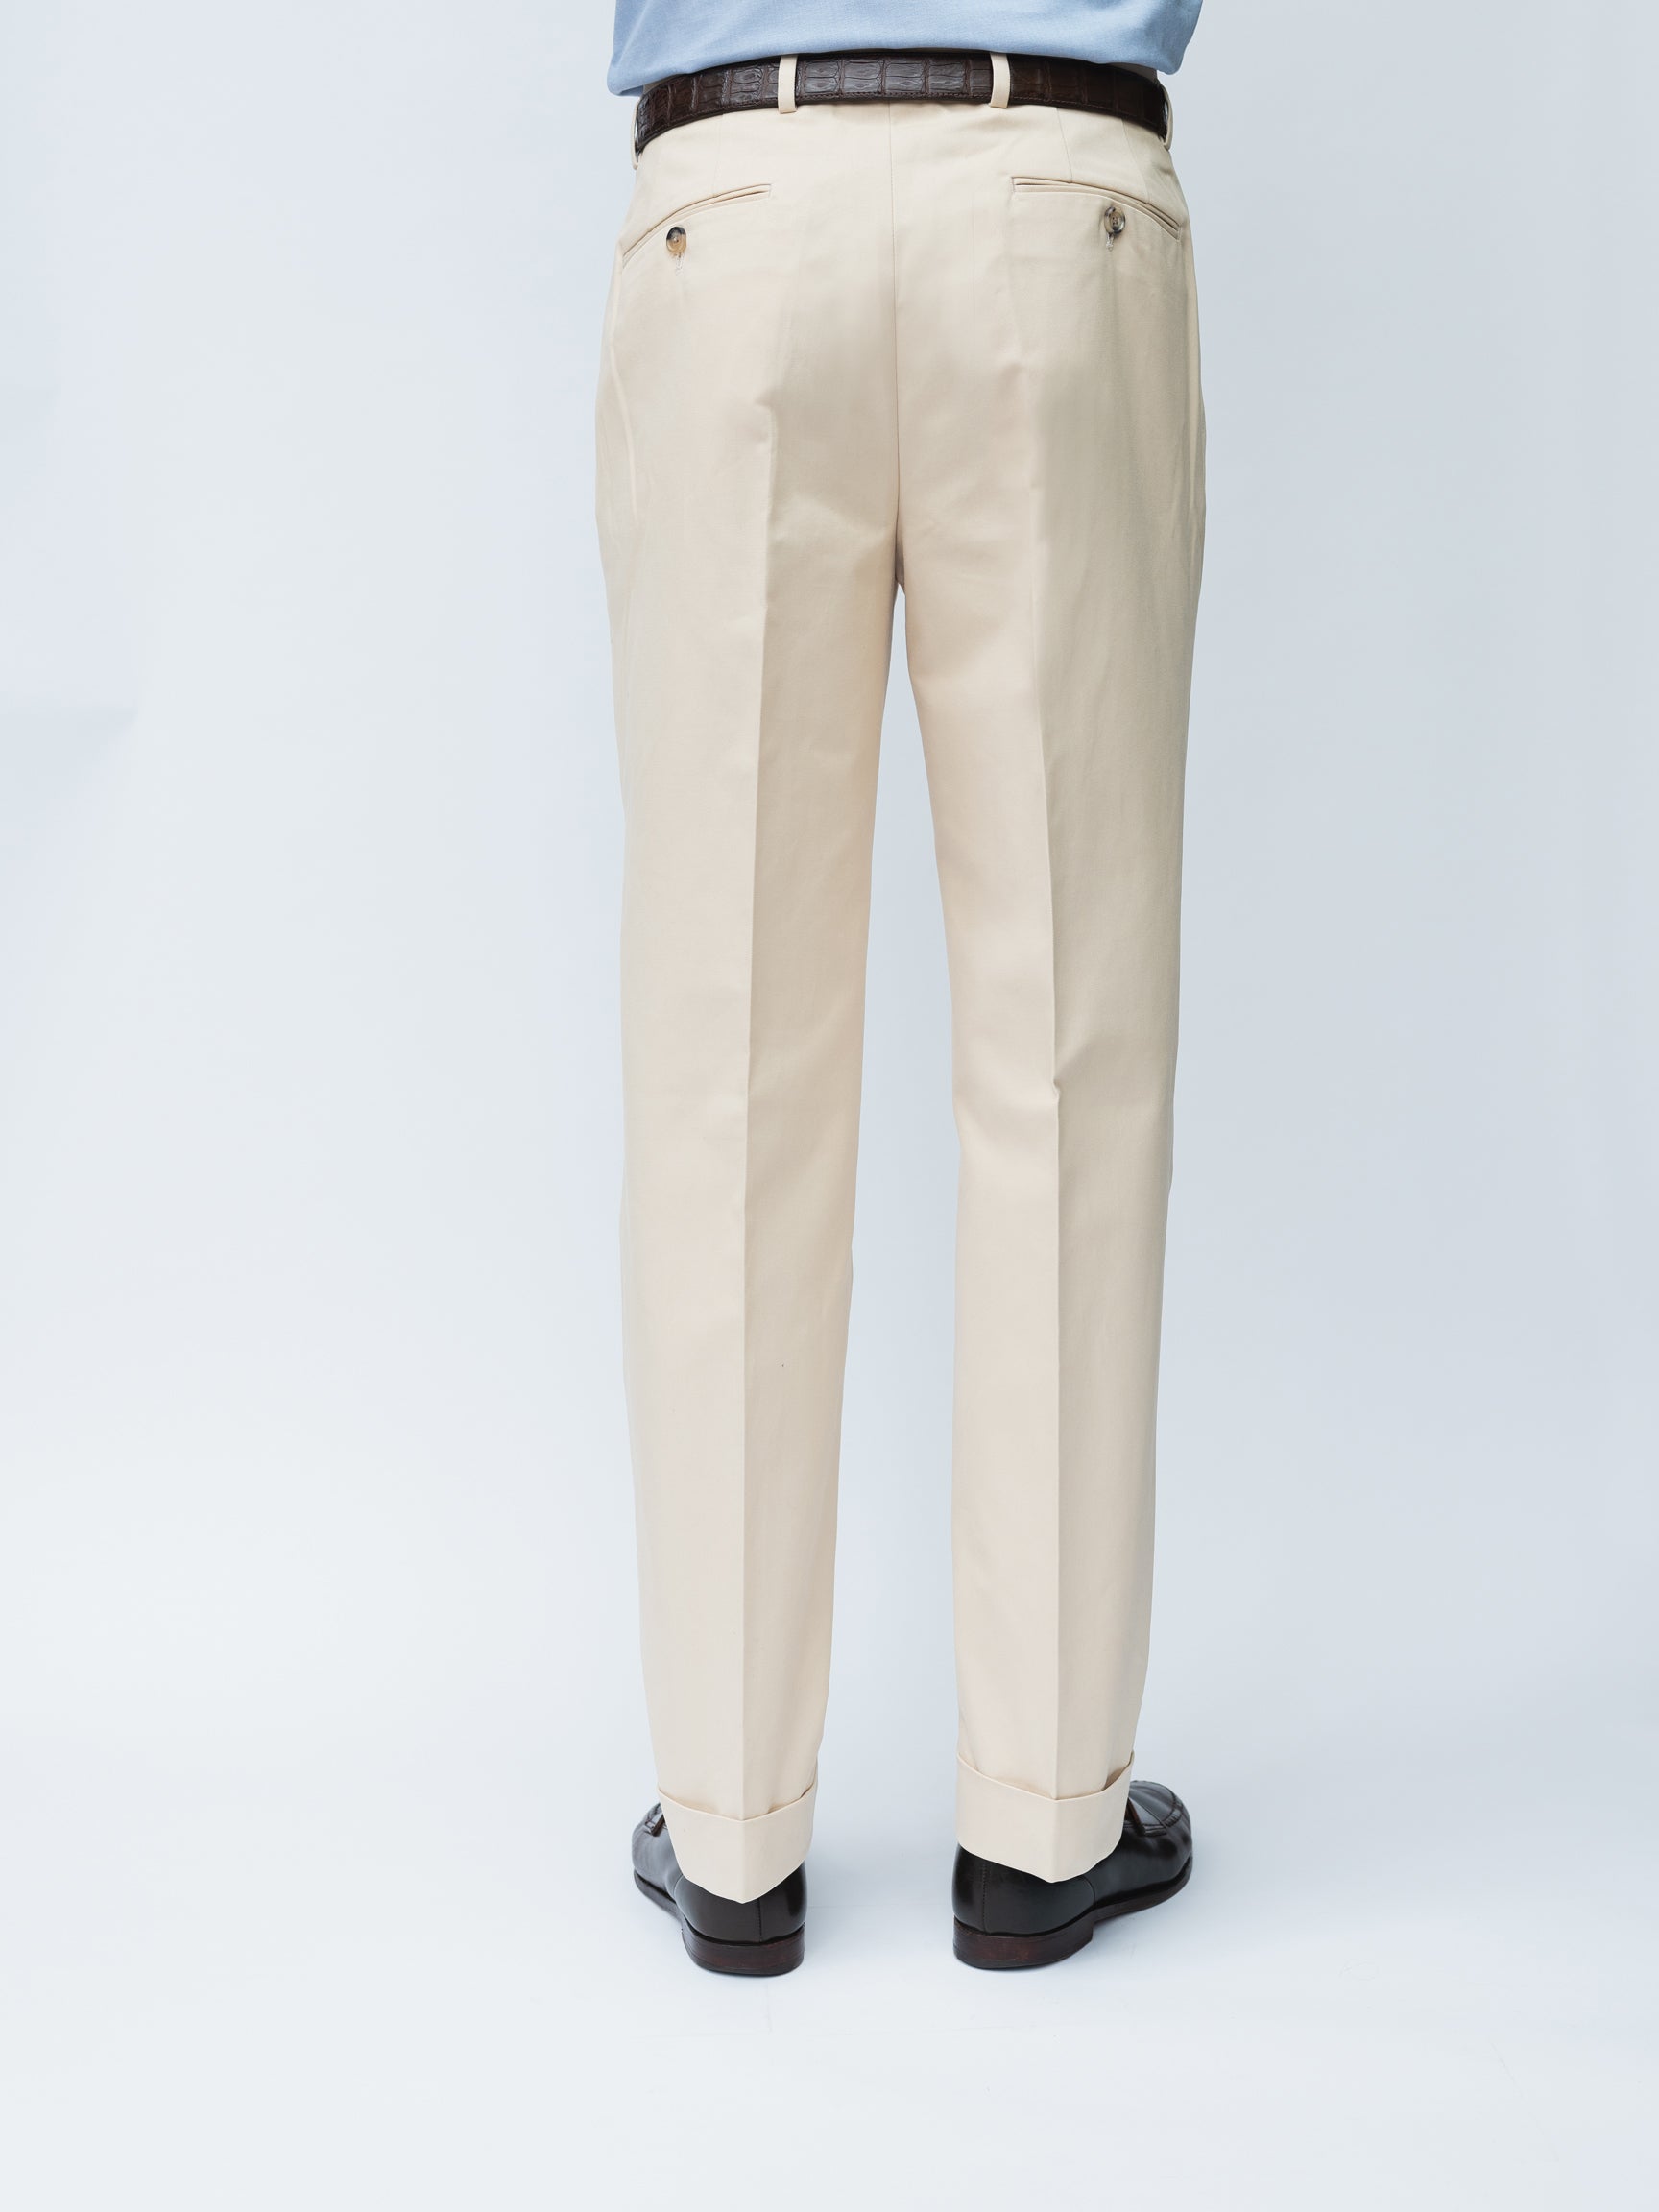 Black Cotton and Wool Double Pleat Pants FW23 25643684 | Zegna US